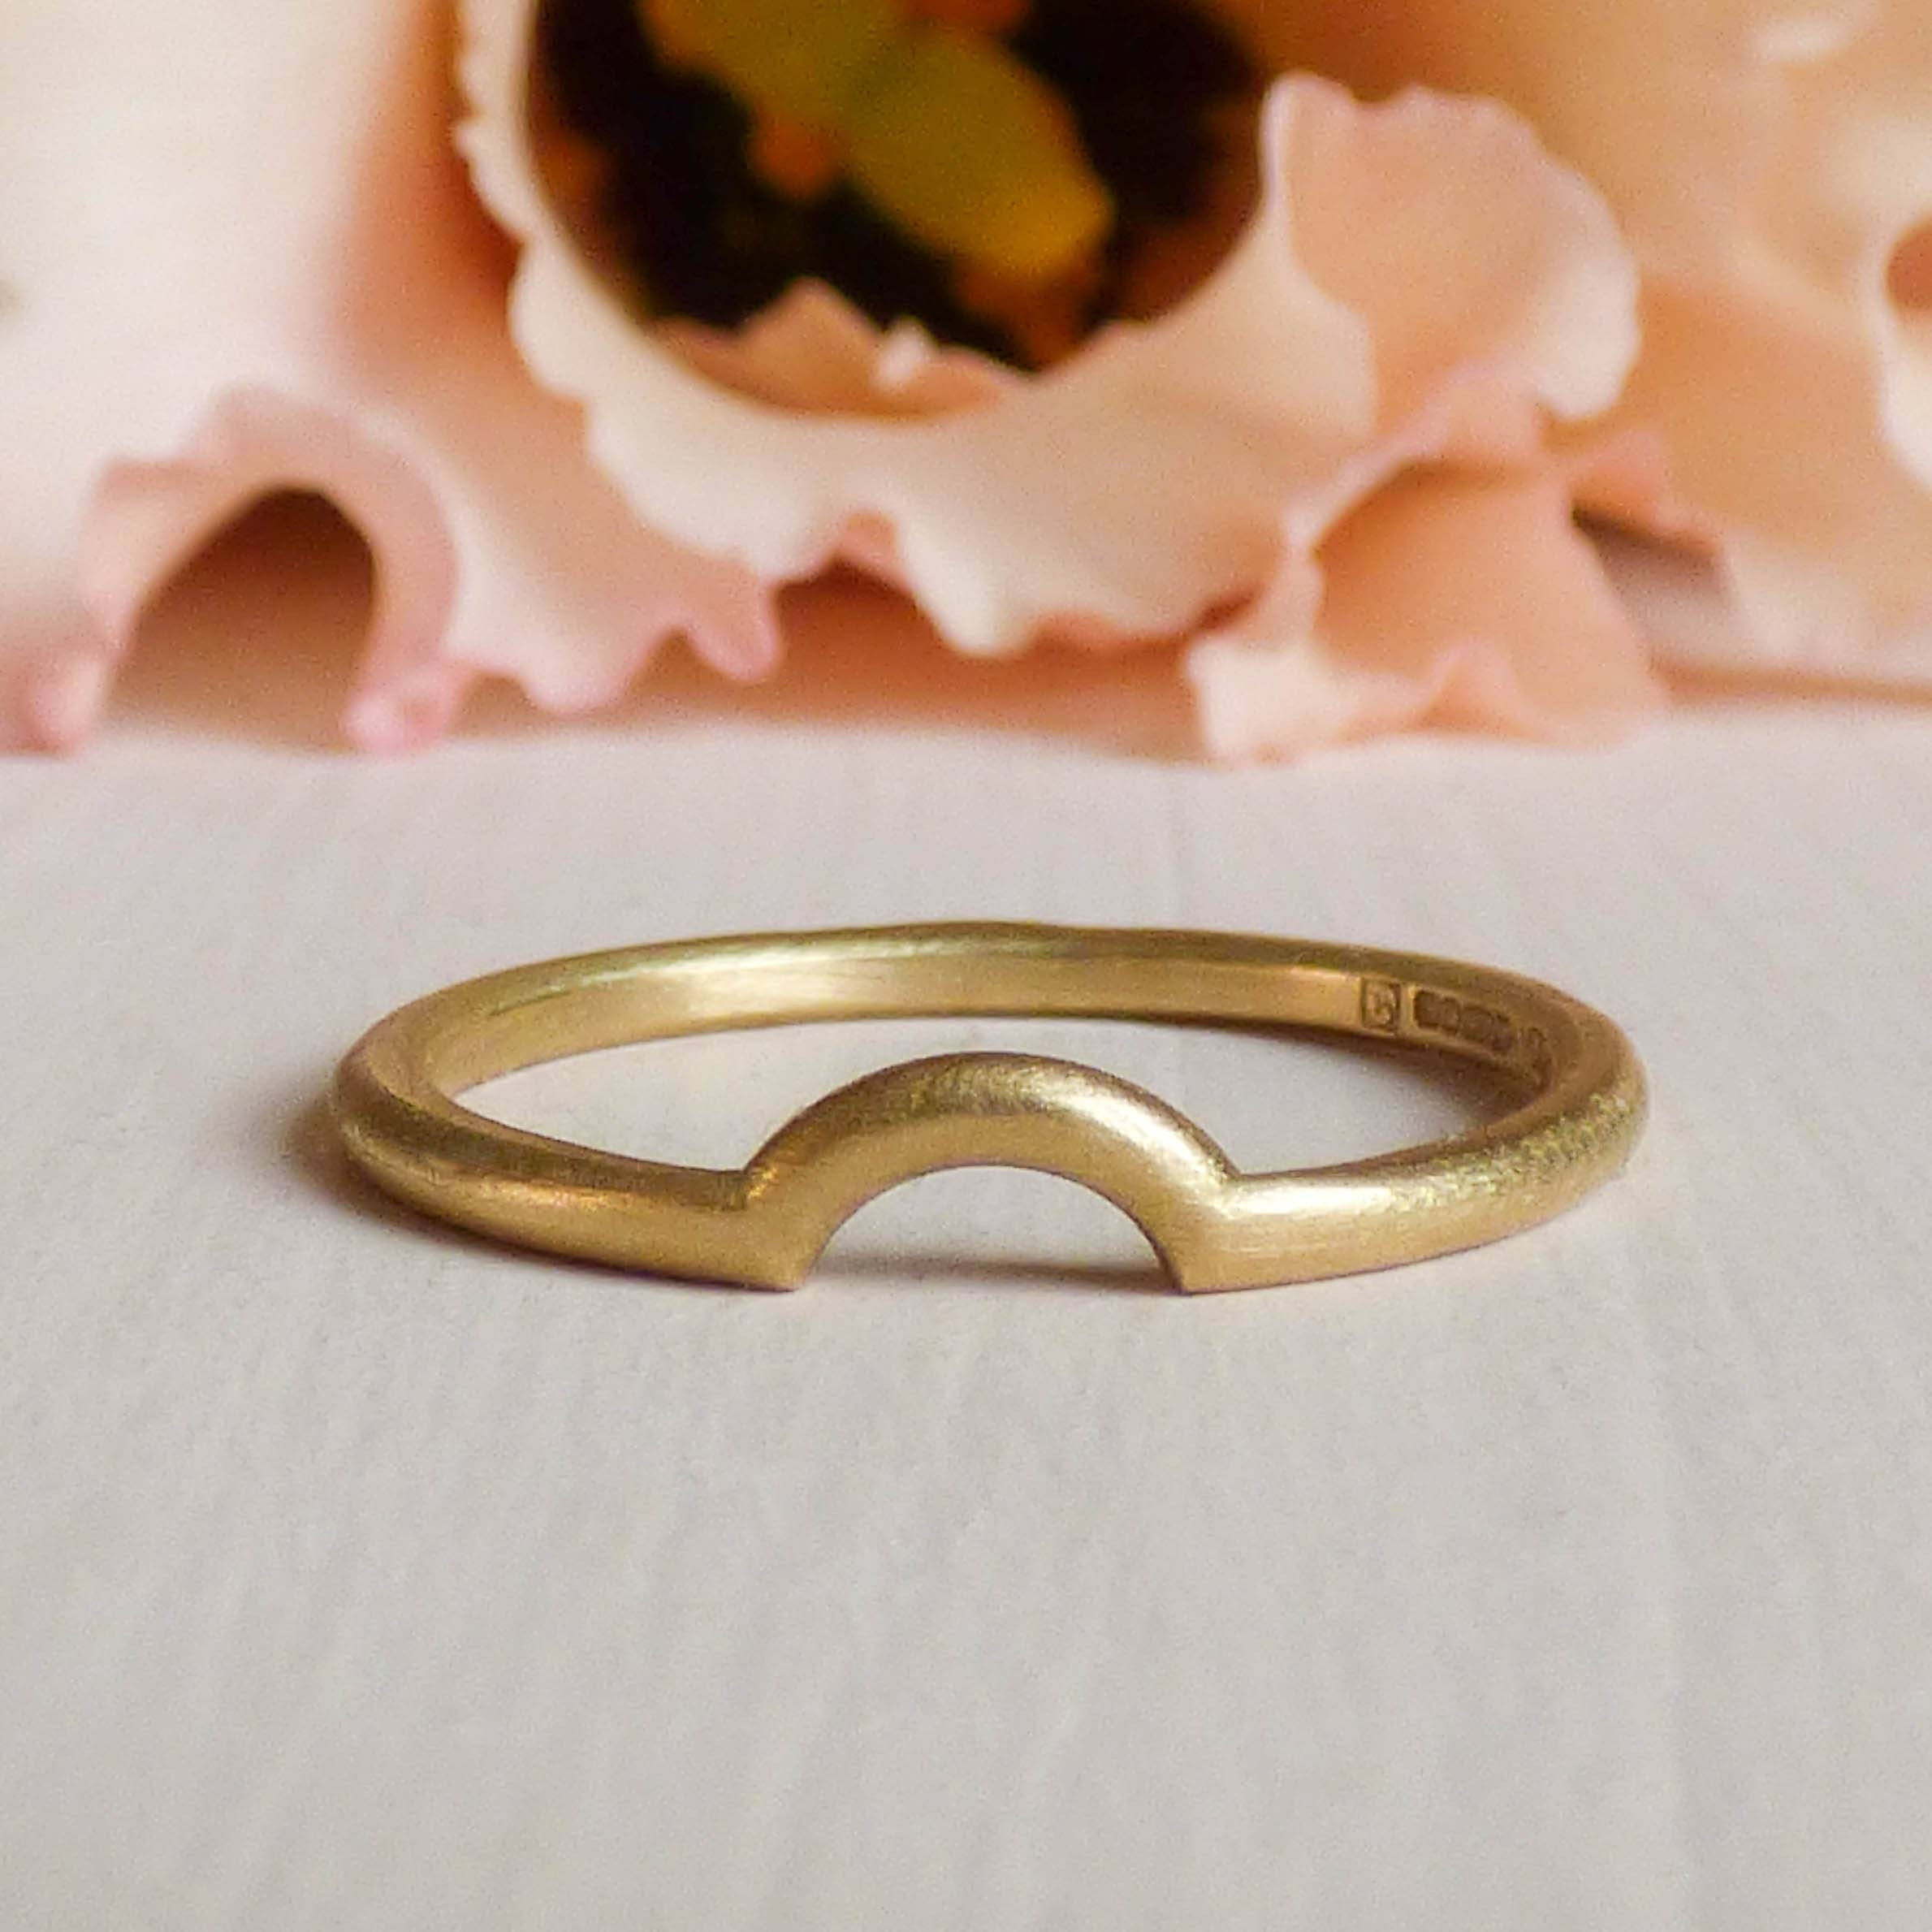 Ethical Wedding Rings
 15 Collection of Ethical Wedding Bands